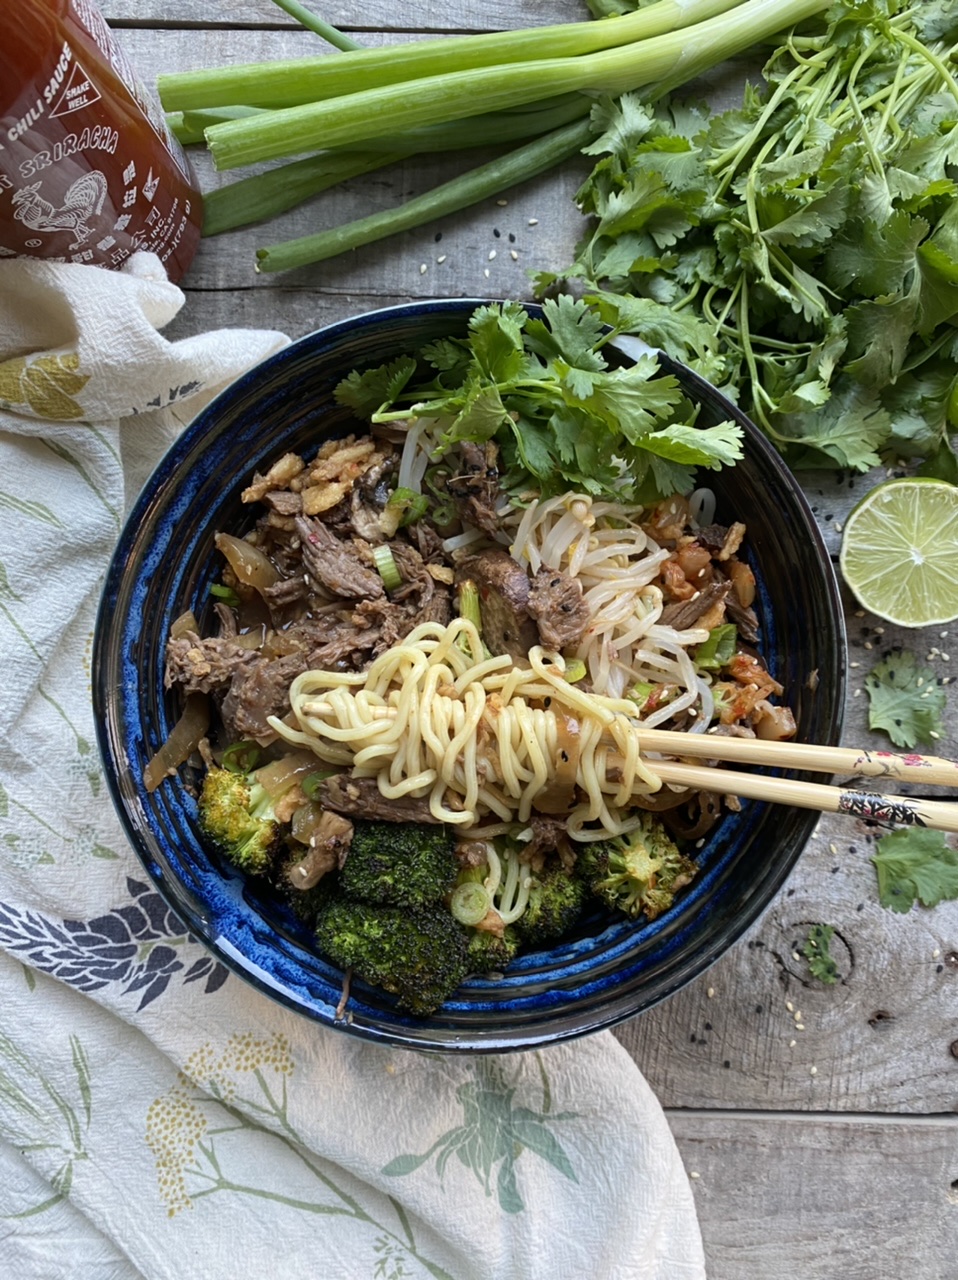 DB875A92 2C69 45A0 BB5B 9244C481B277 - Slow Cooker Asian Ginger Noodles with Spicy Pulled Beef & Roasted Broccoli